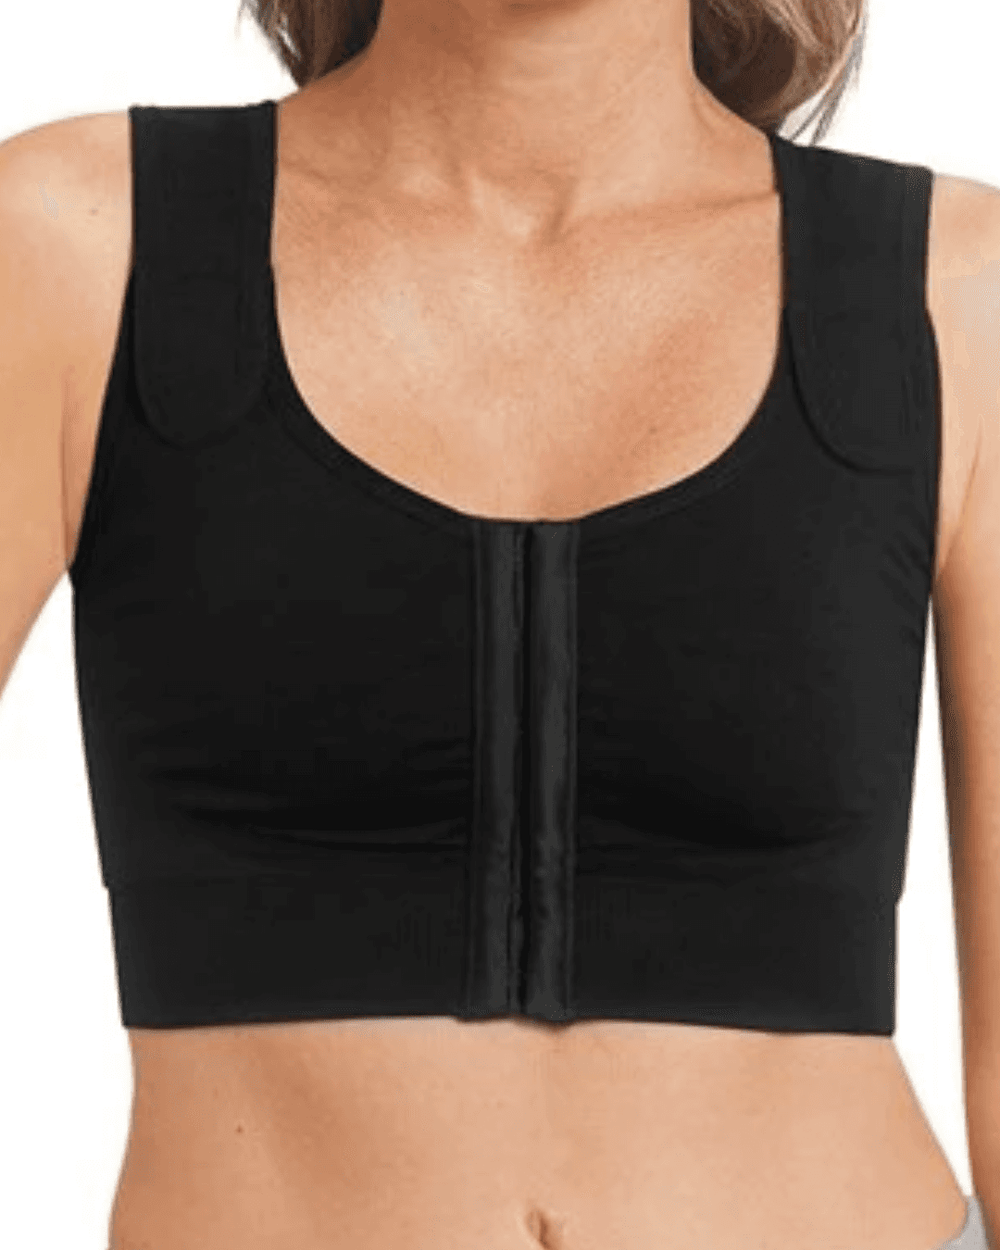 Top Rated Mastectomy Bras - Chest Inclusive